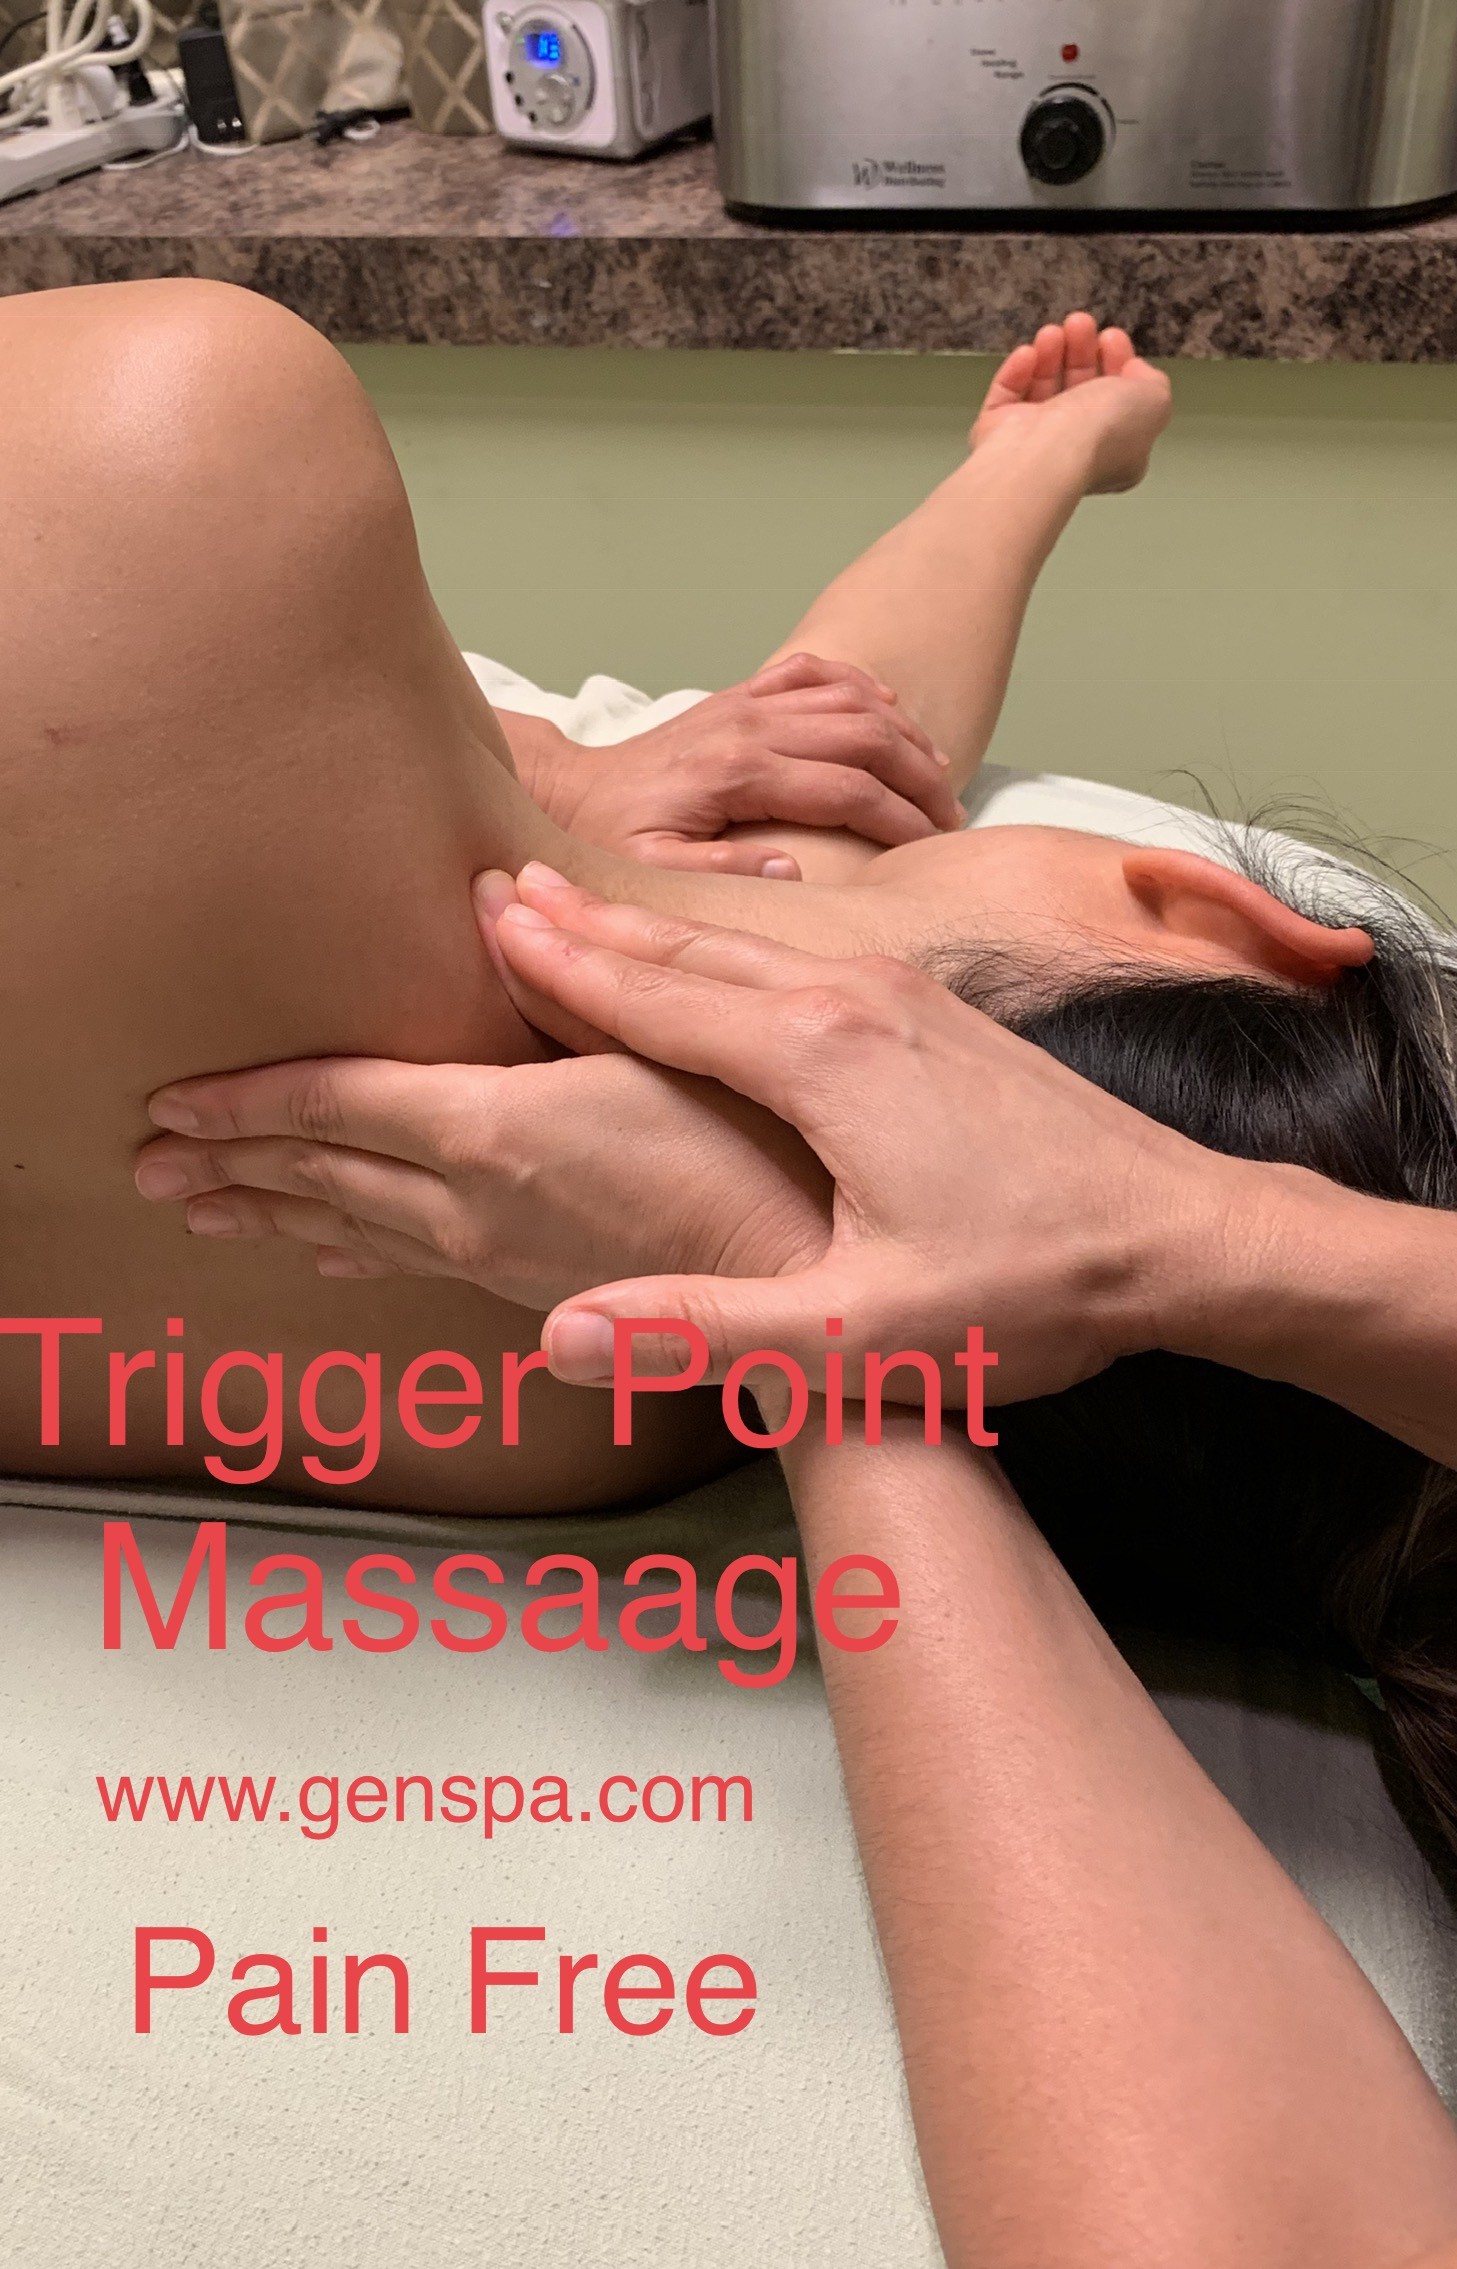 Gen Spa massage can keep you away from the doctor